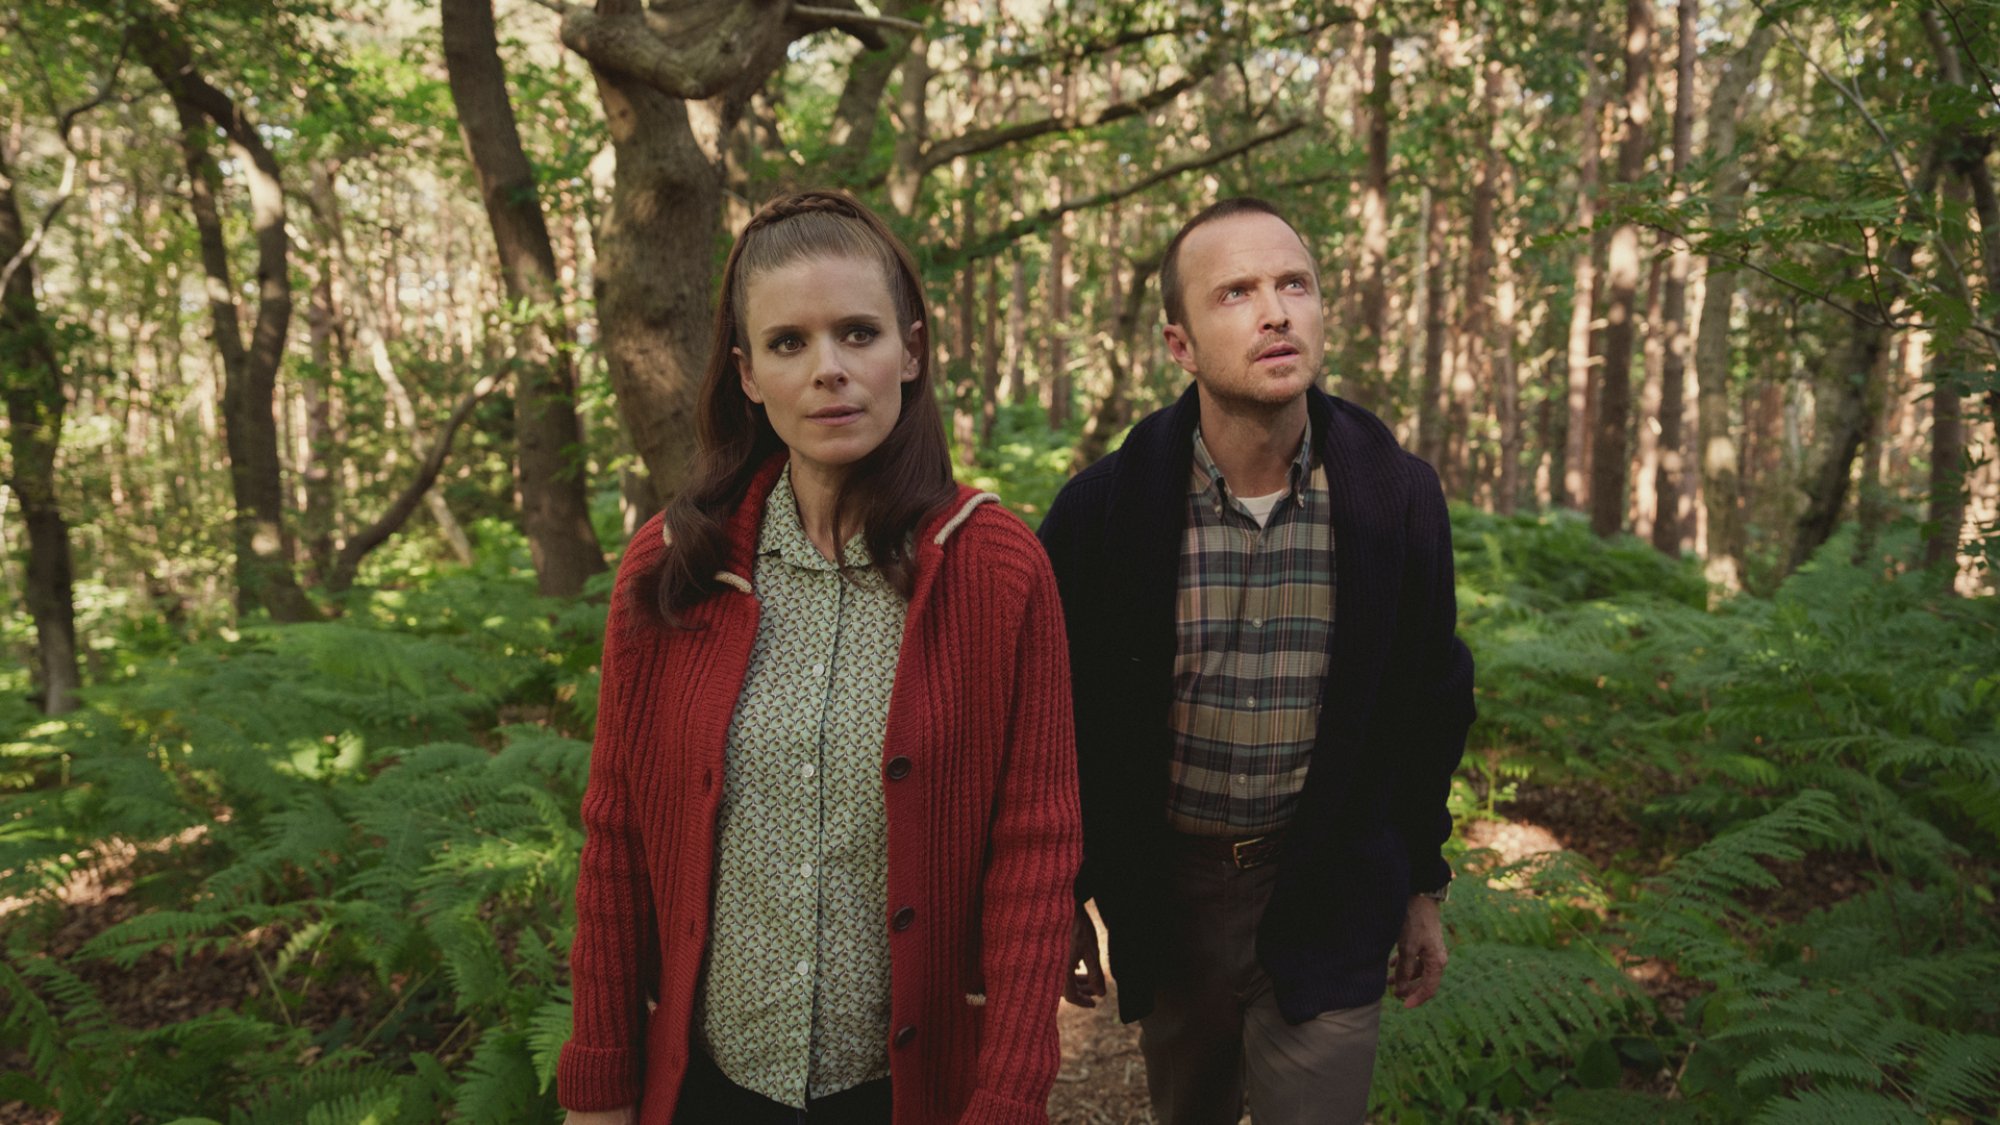 In the TV show "Black Mirror" Kate Mara and Aaron Paul walk through a forest.